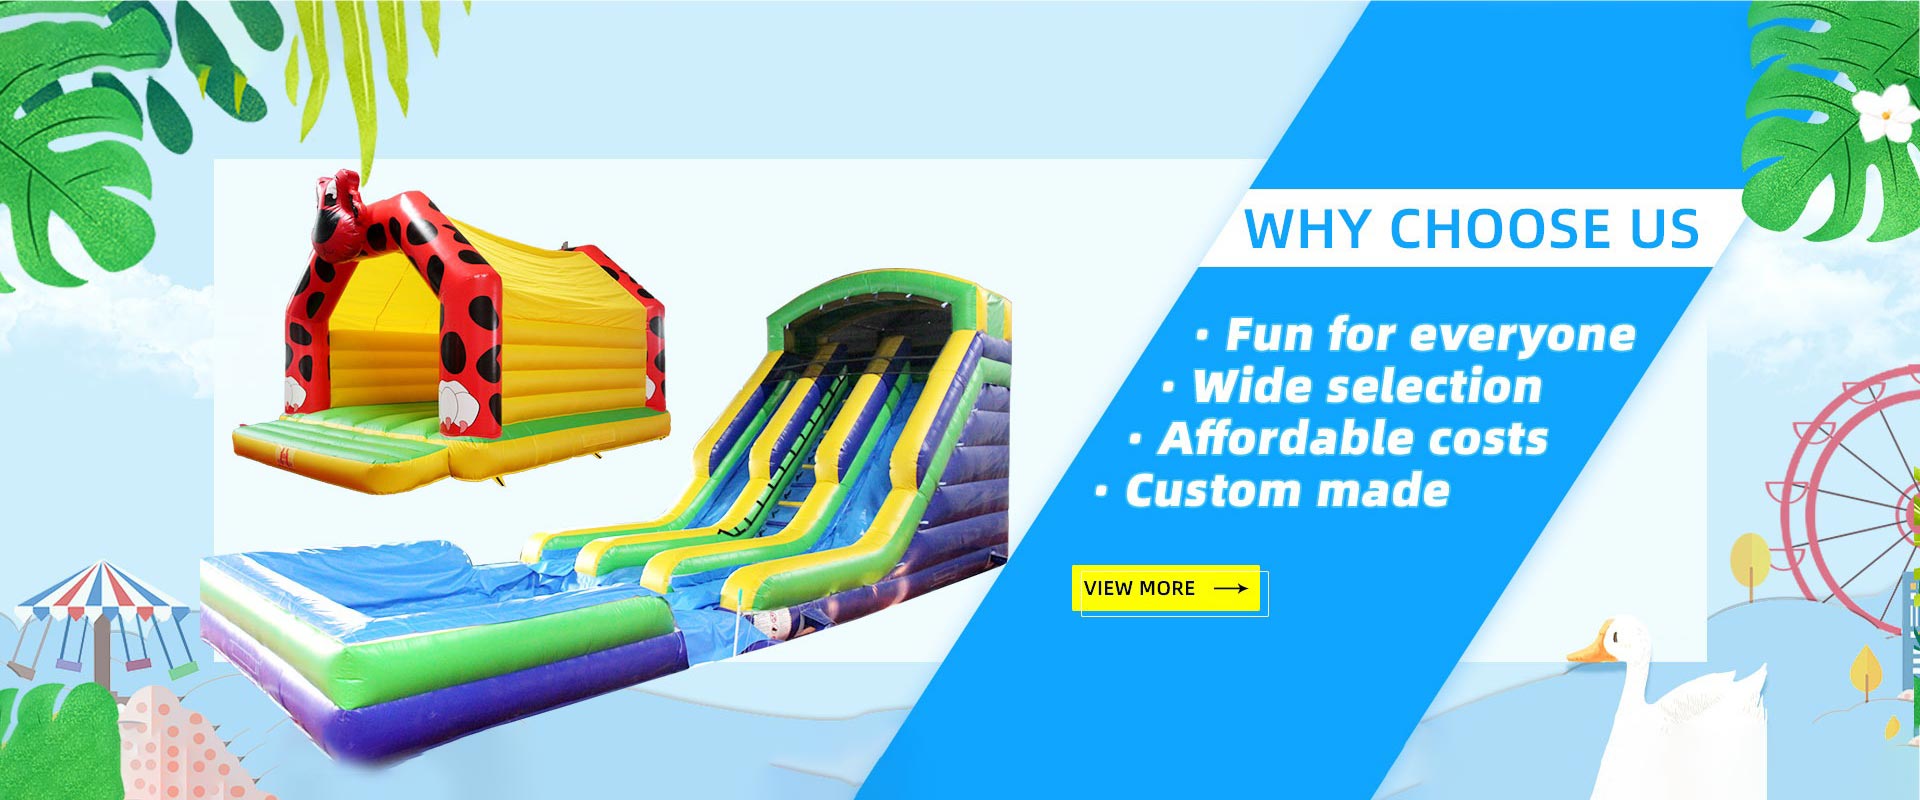 Water Slides Archives - Inflatable Bounce Houses,Inflatable Slides,Inflatable Games